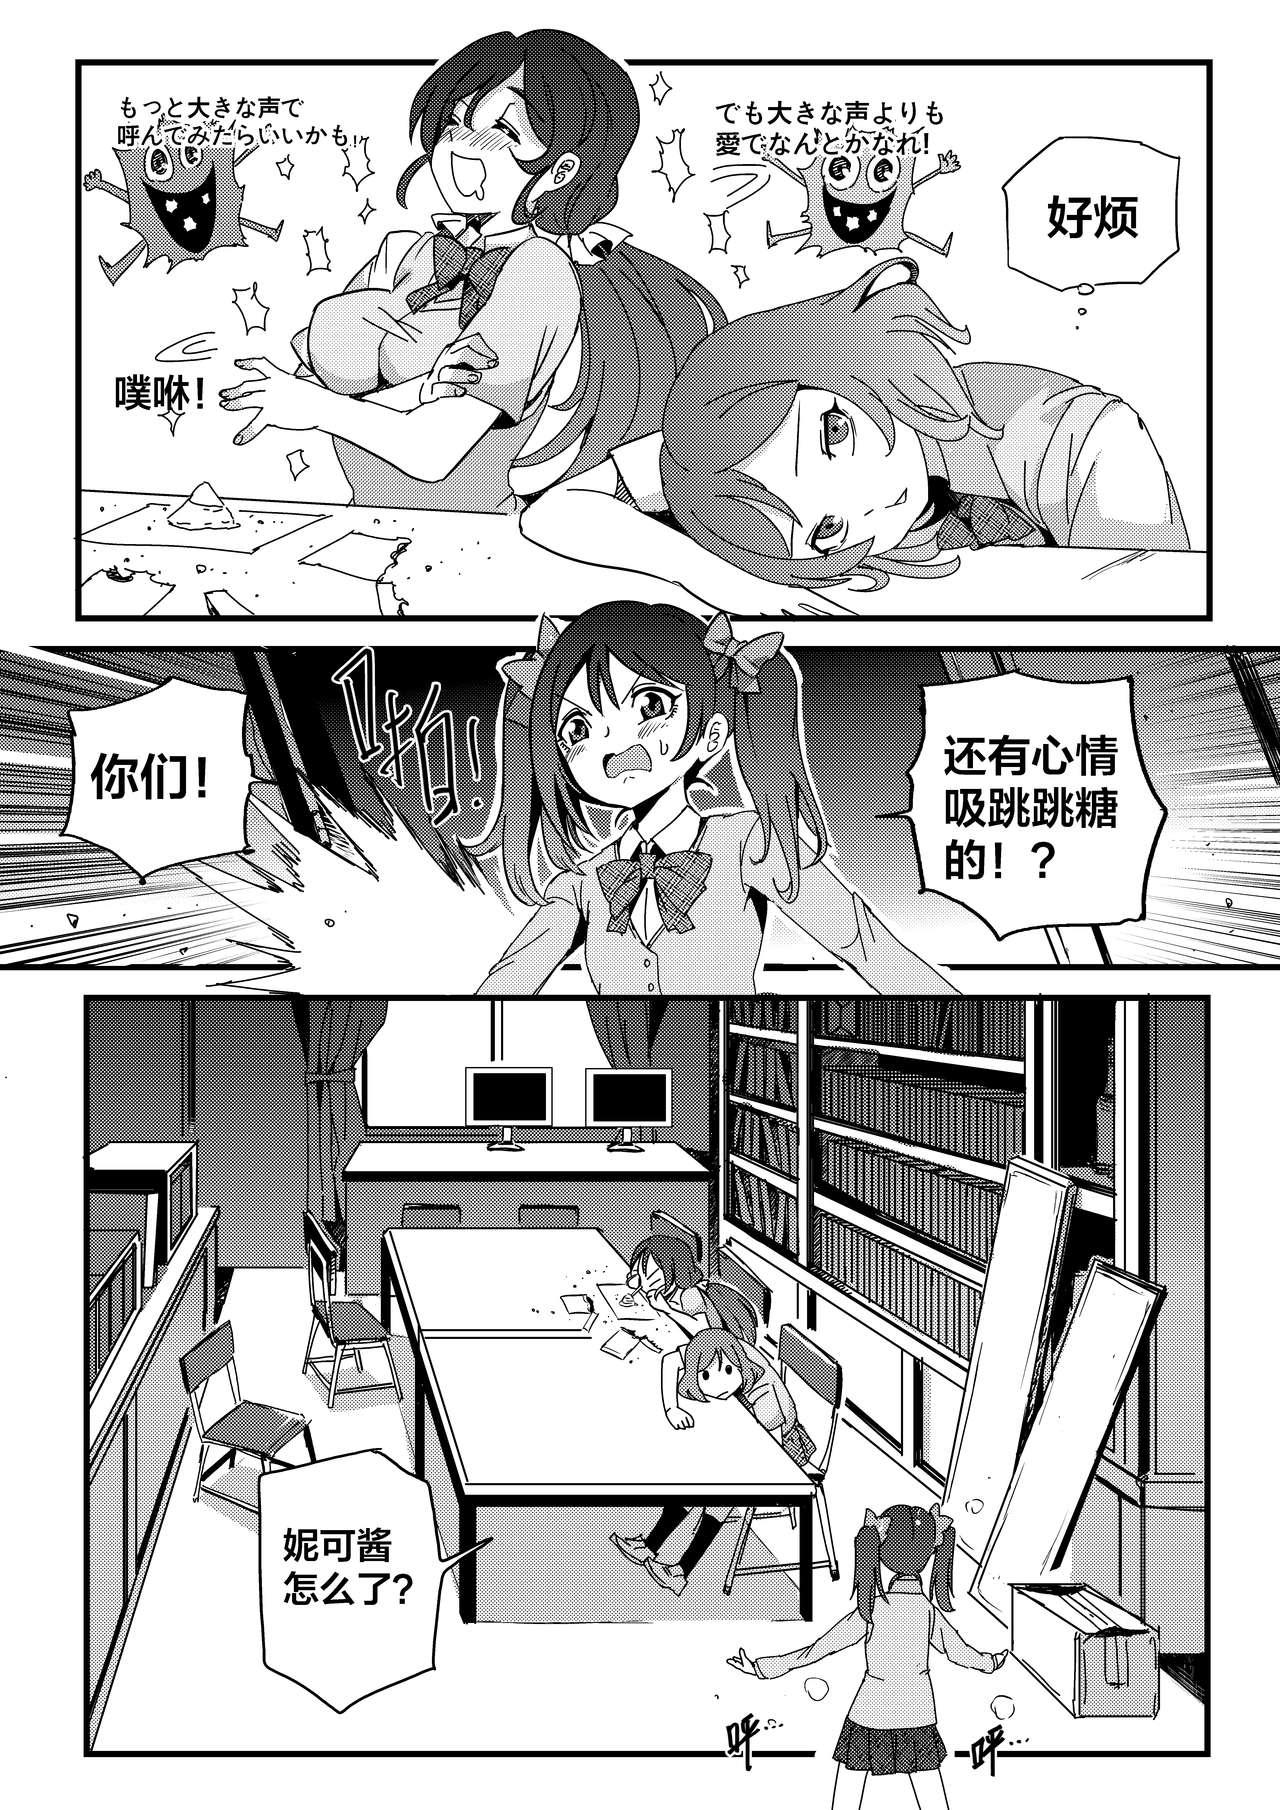 Shy 果胆卯威 - Kantai collection The idolmaster Love live Deflowered - Page 2